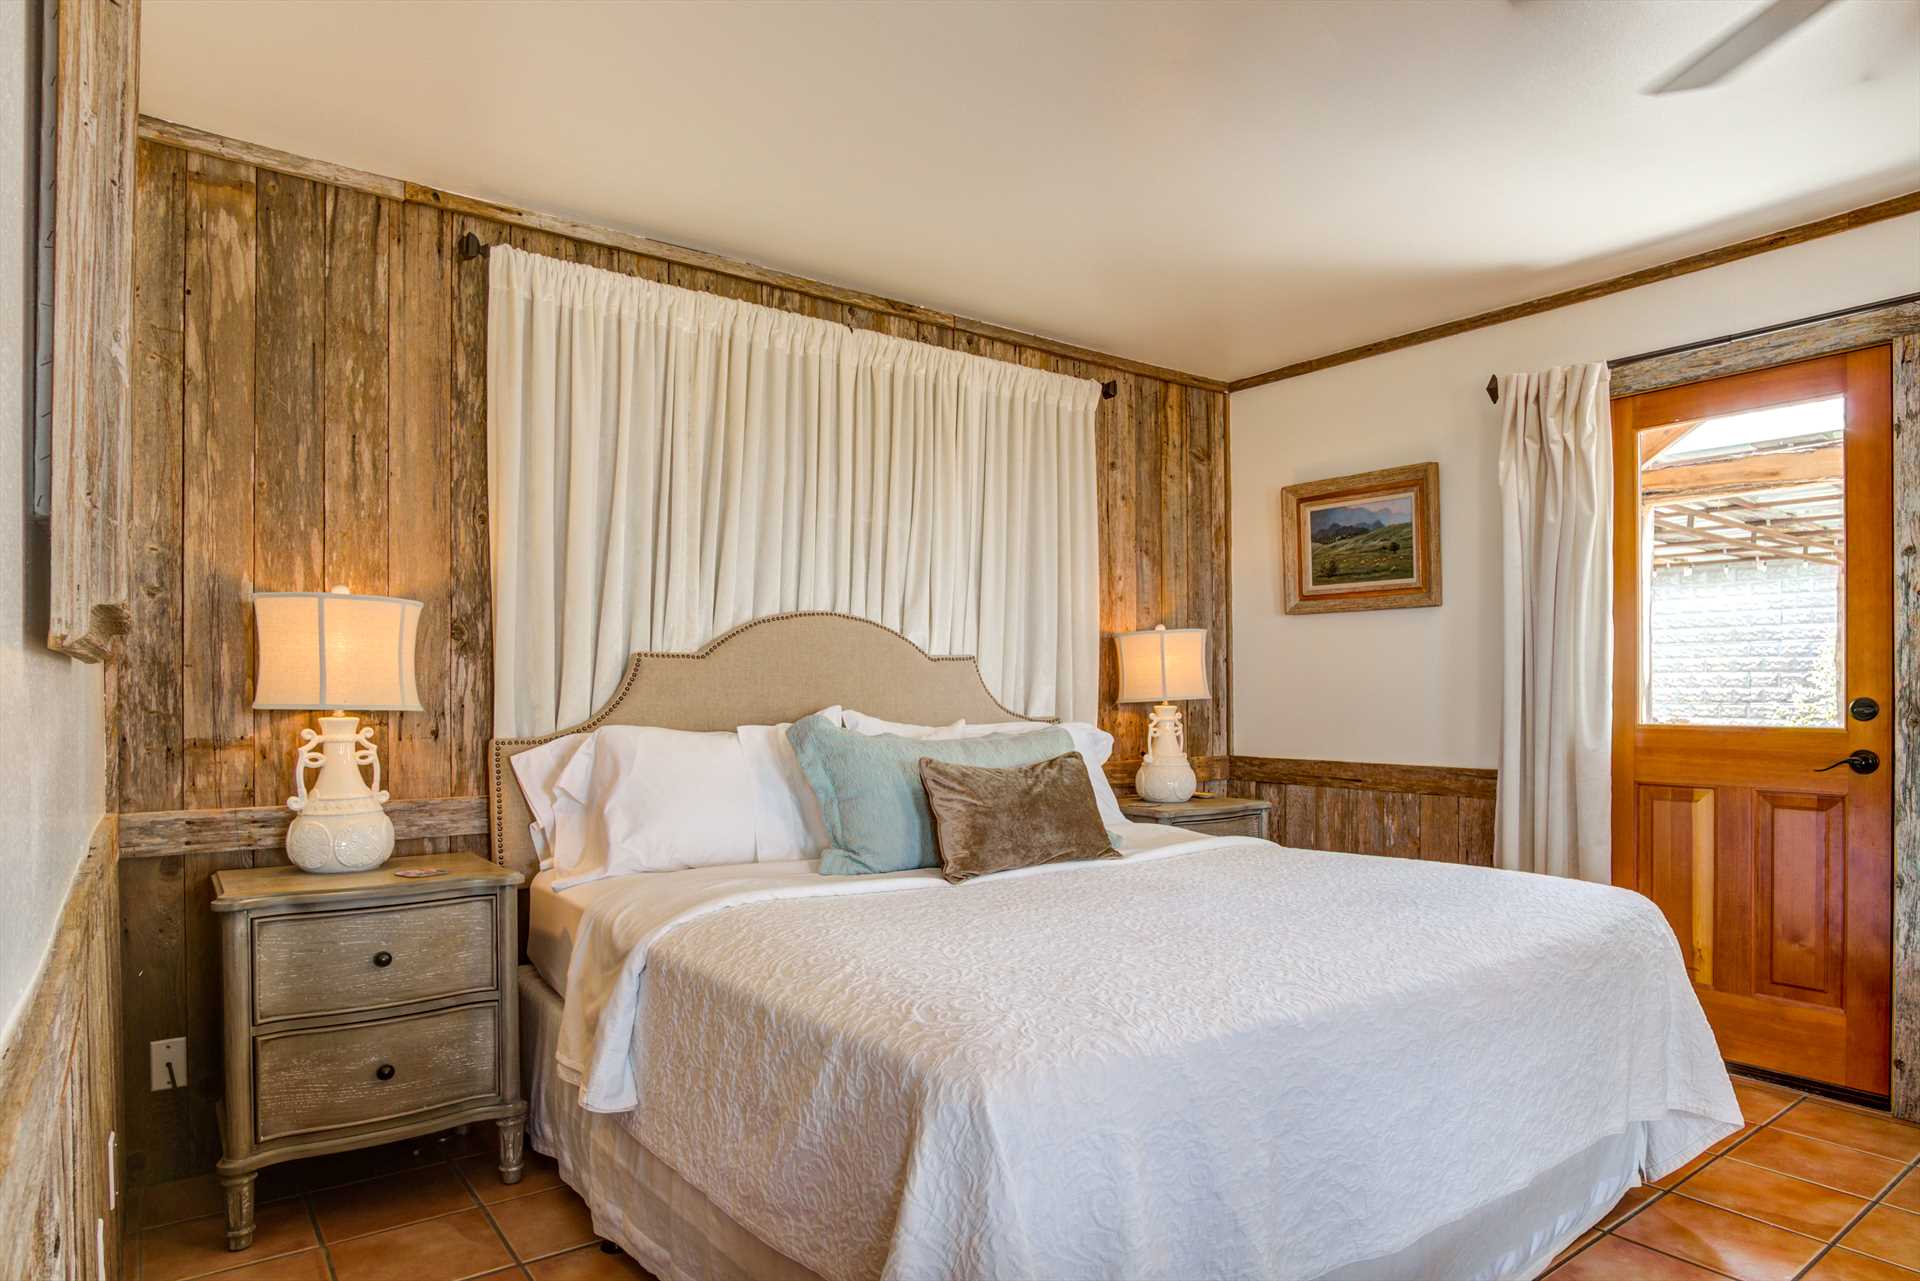                                                 All the sleeping spaces at Mucho Gusto include fluffy, clean, and sleep-friendly linens as part of your stay.